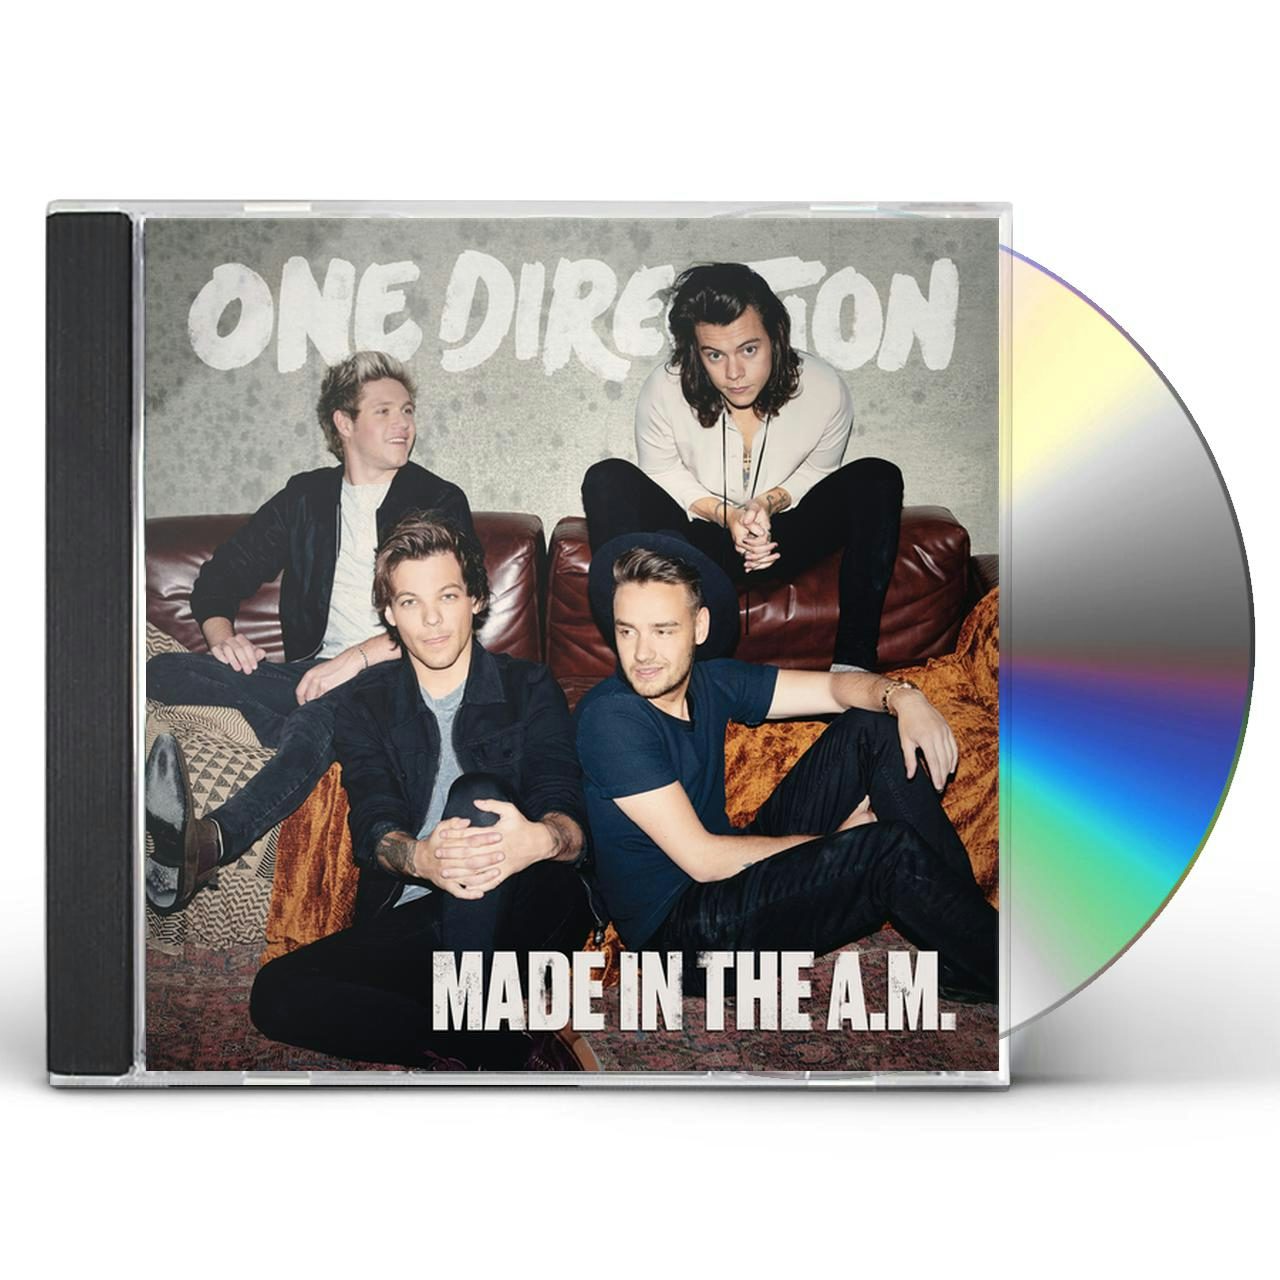 made in the am album cover